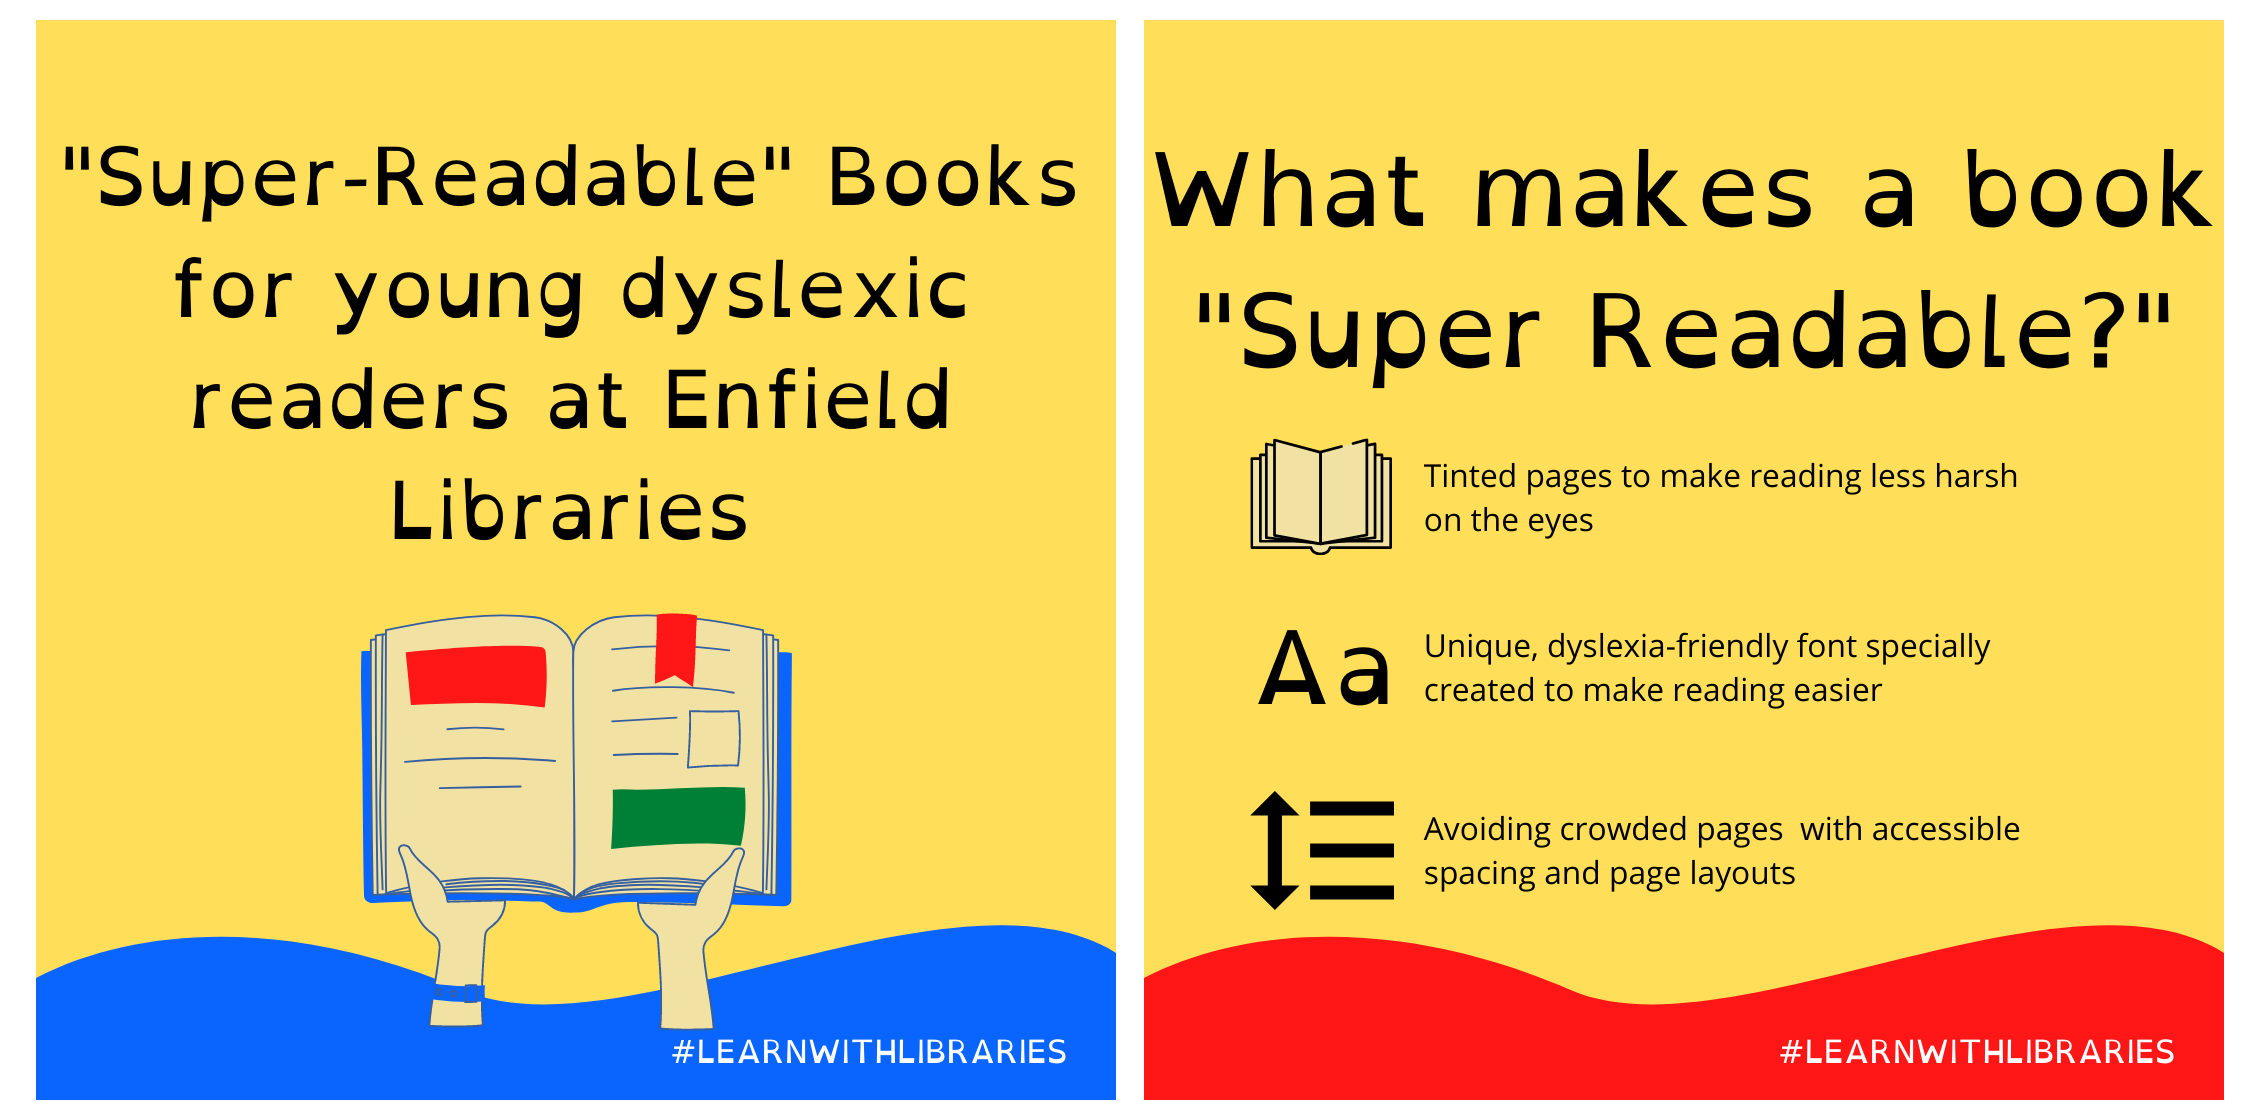 super-readable-books-for-dyslexic-students-available-from-enfield